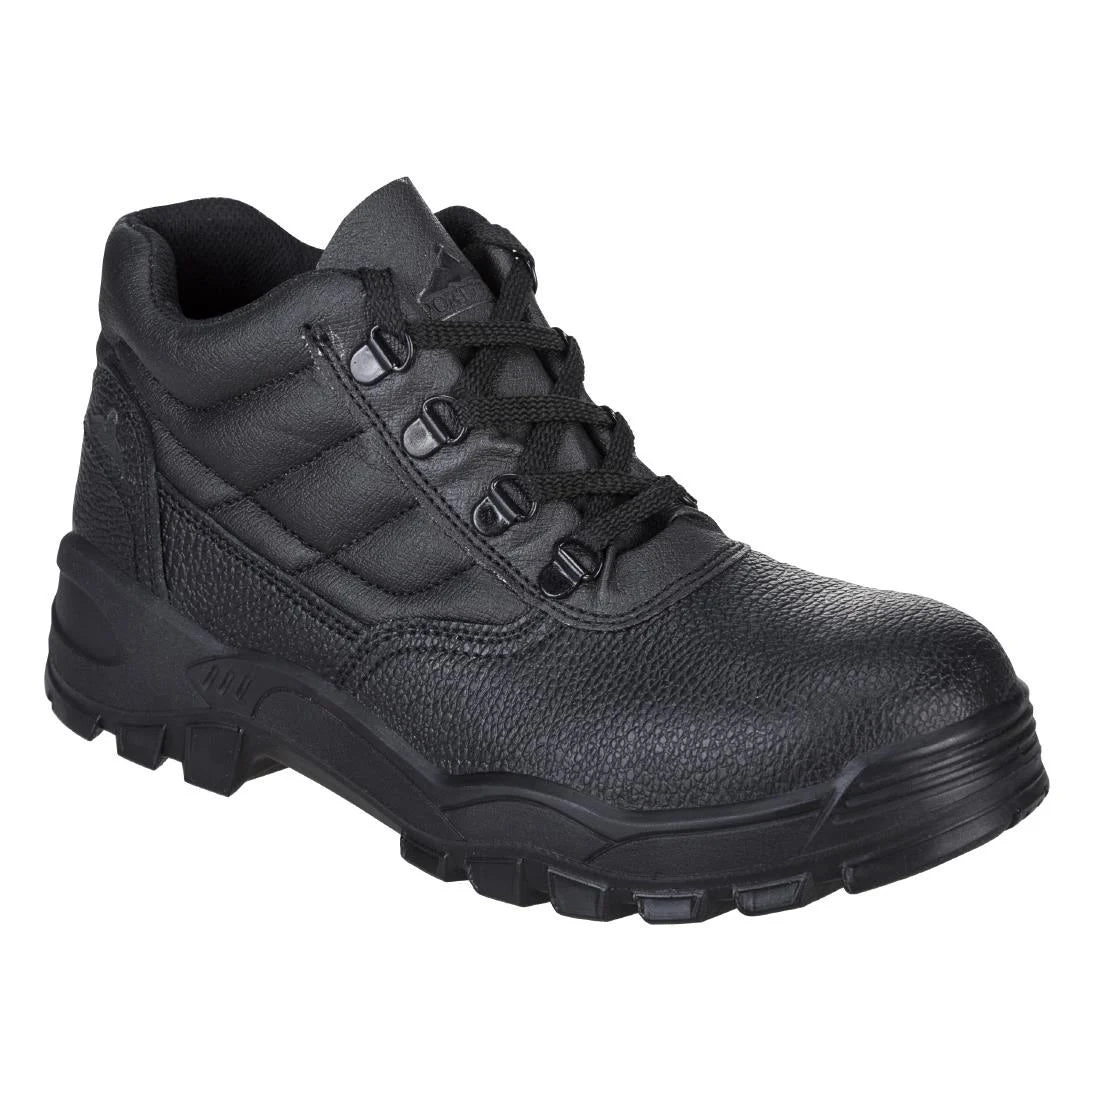 BA059-45 Portwest Protector Boot S1P Black Size 45 JD Catering Equipment Solutions Ltd